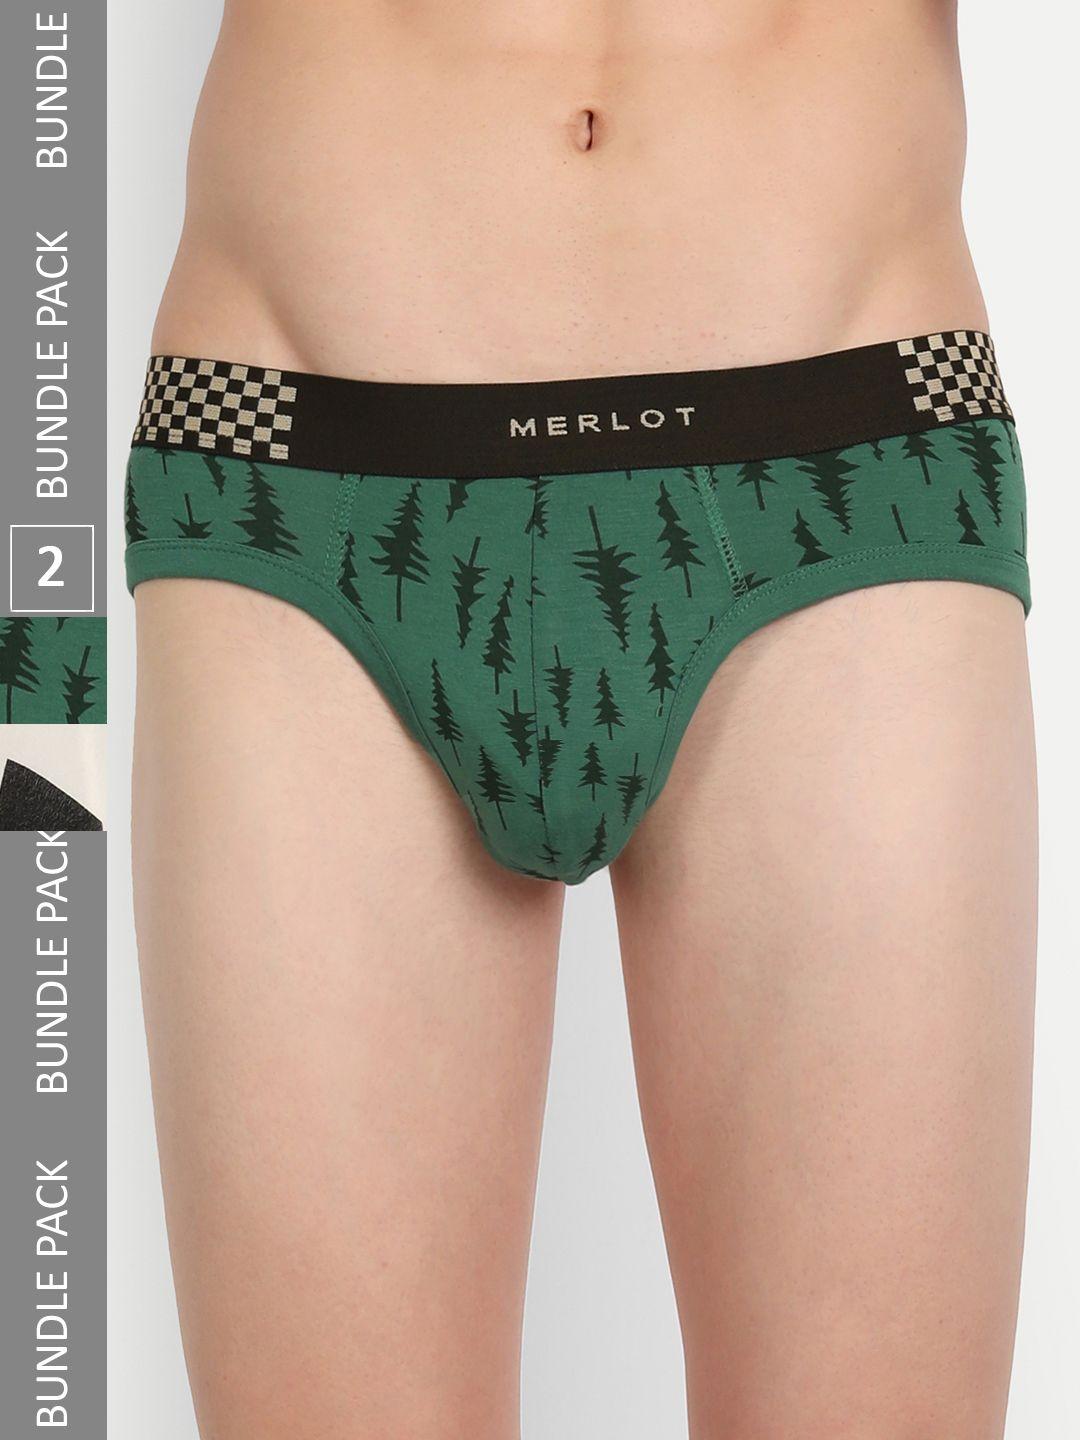 merlot men pack of 2 printed ultra-soft & smooth bamboo cotton basic briefs